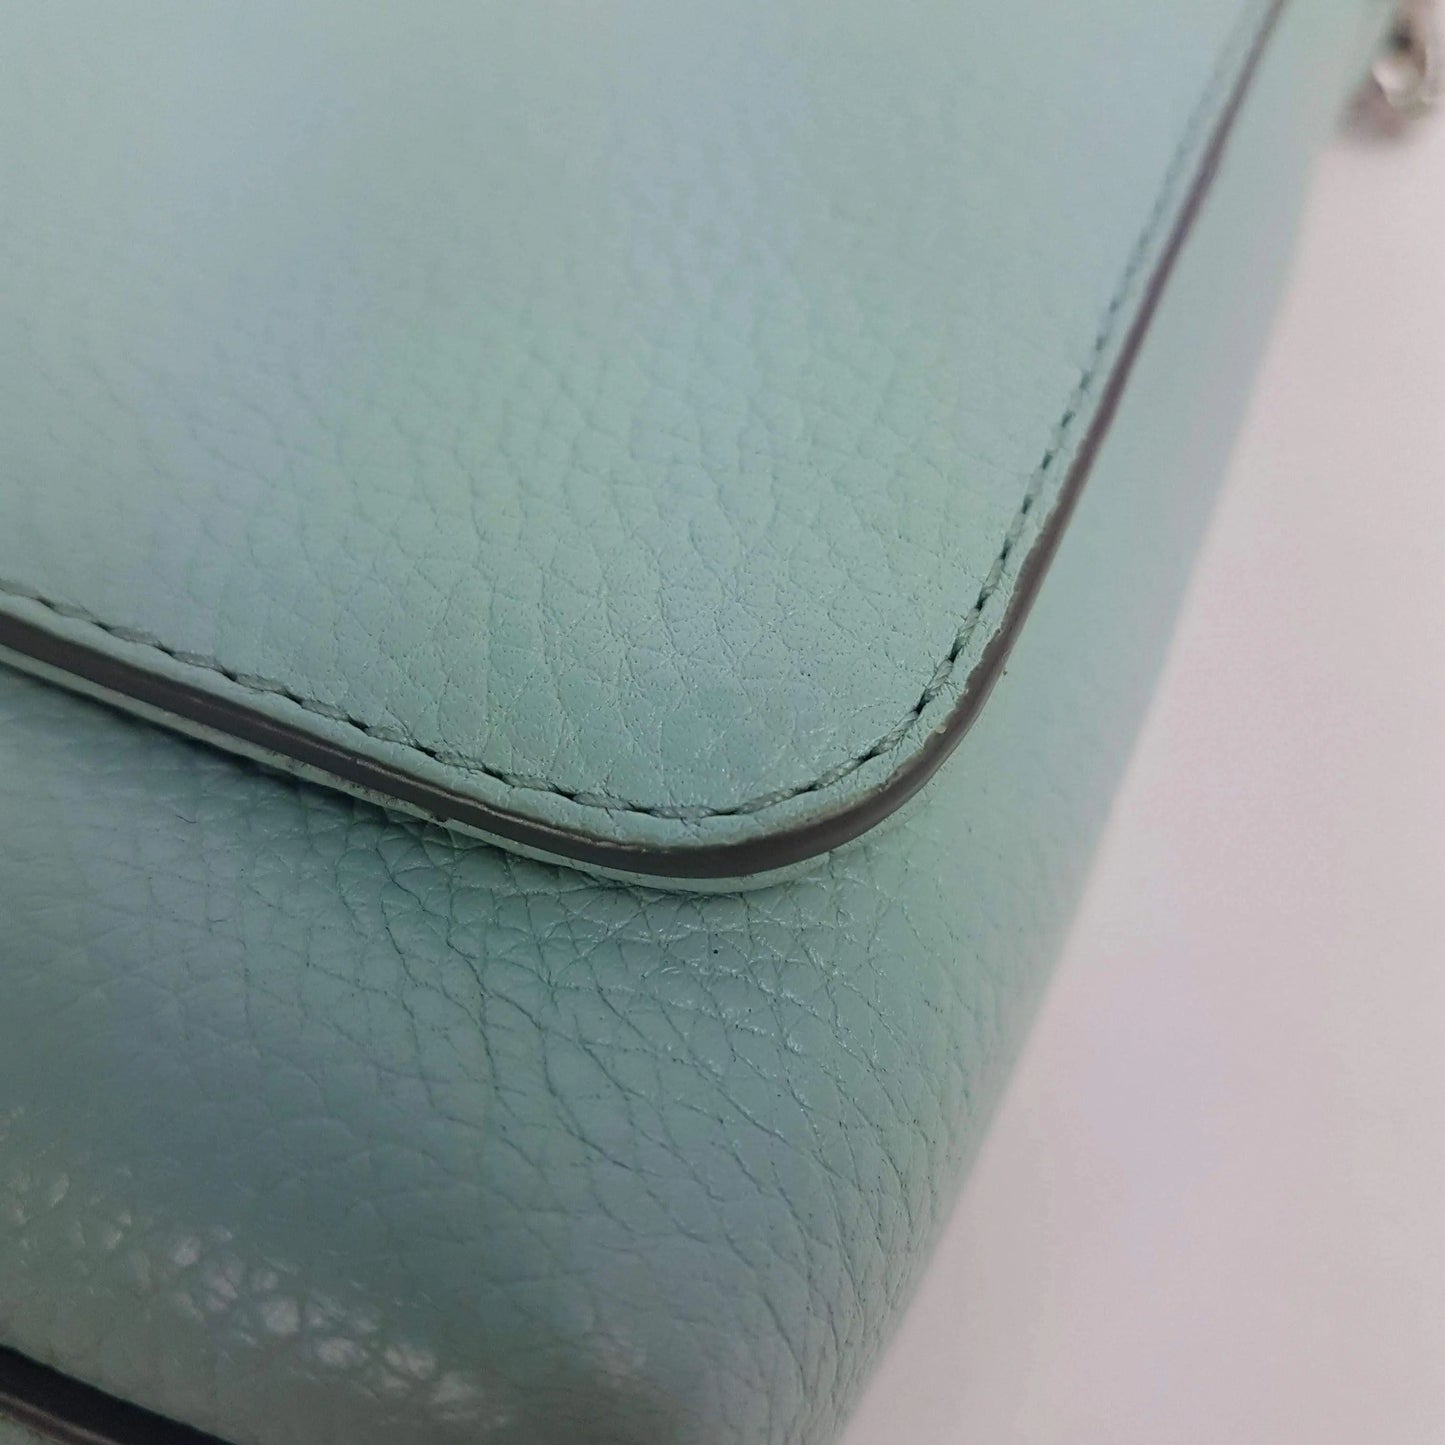 Load image into Gallery viewer, Coach Coach Crosstown Crossbody Bag In Pebble Leather Light Green LVBagaholic
